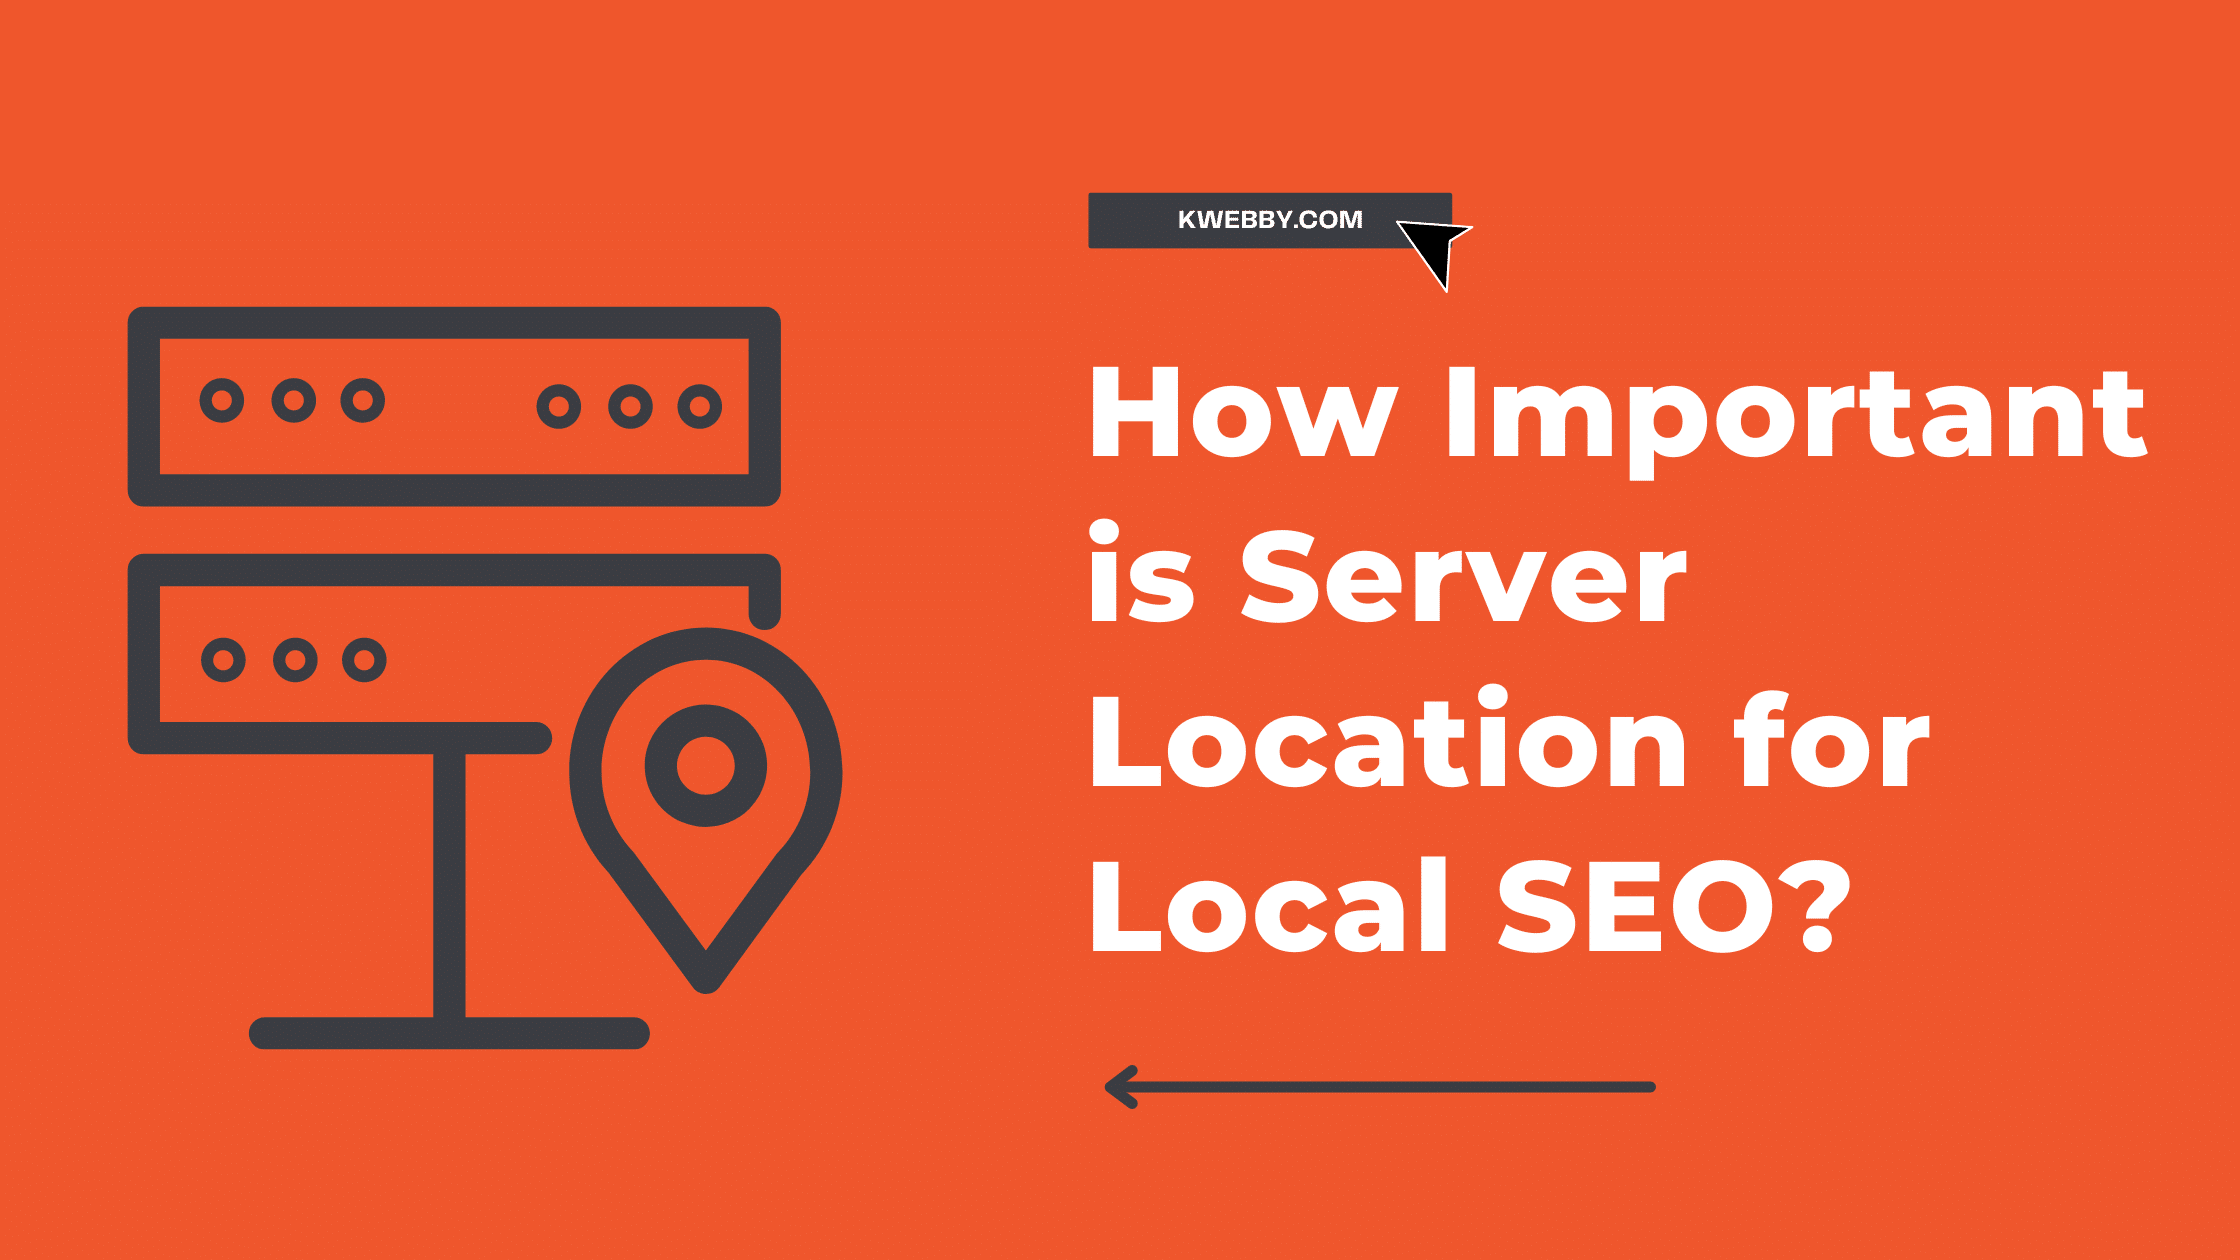 How Important is Server Location for Local SEO?